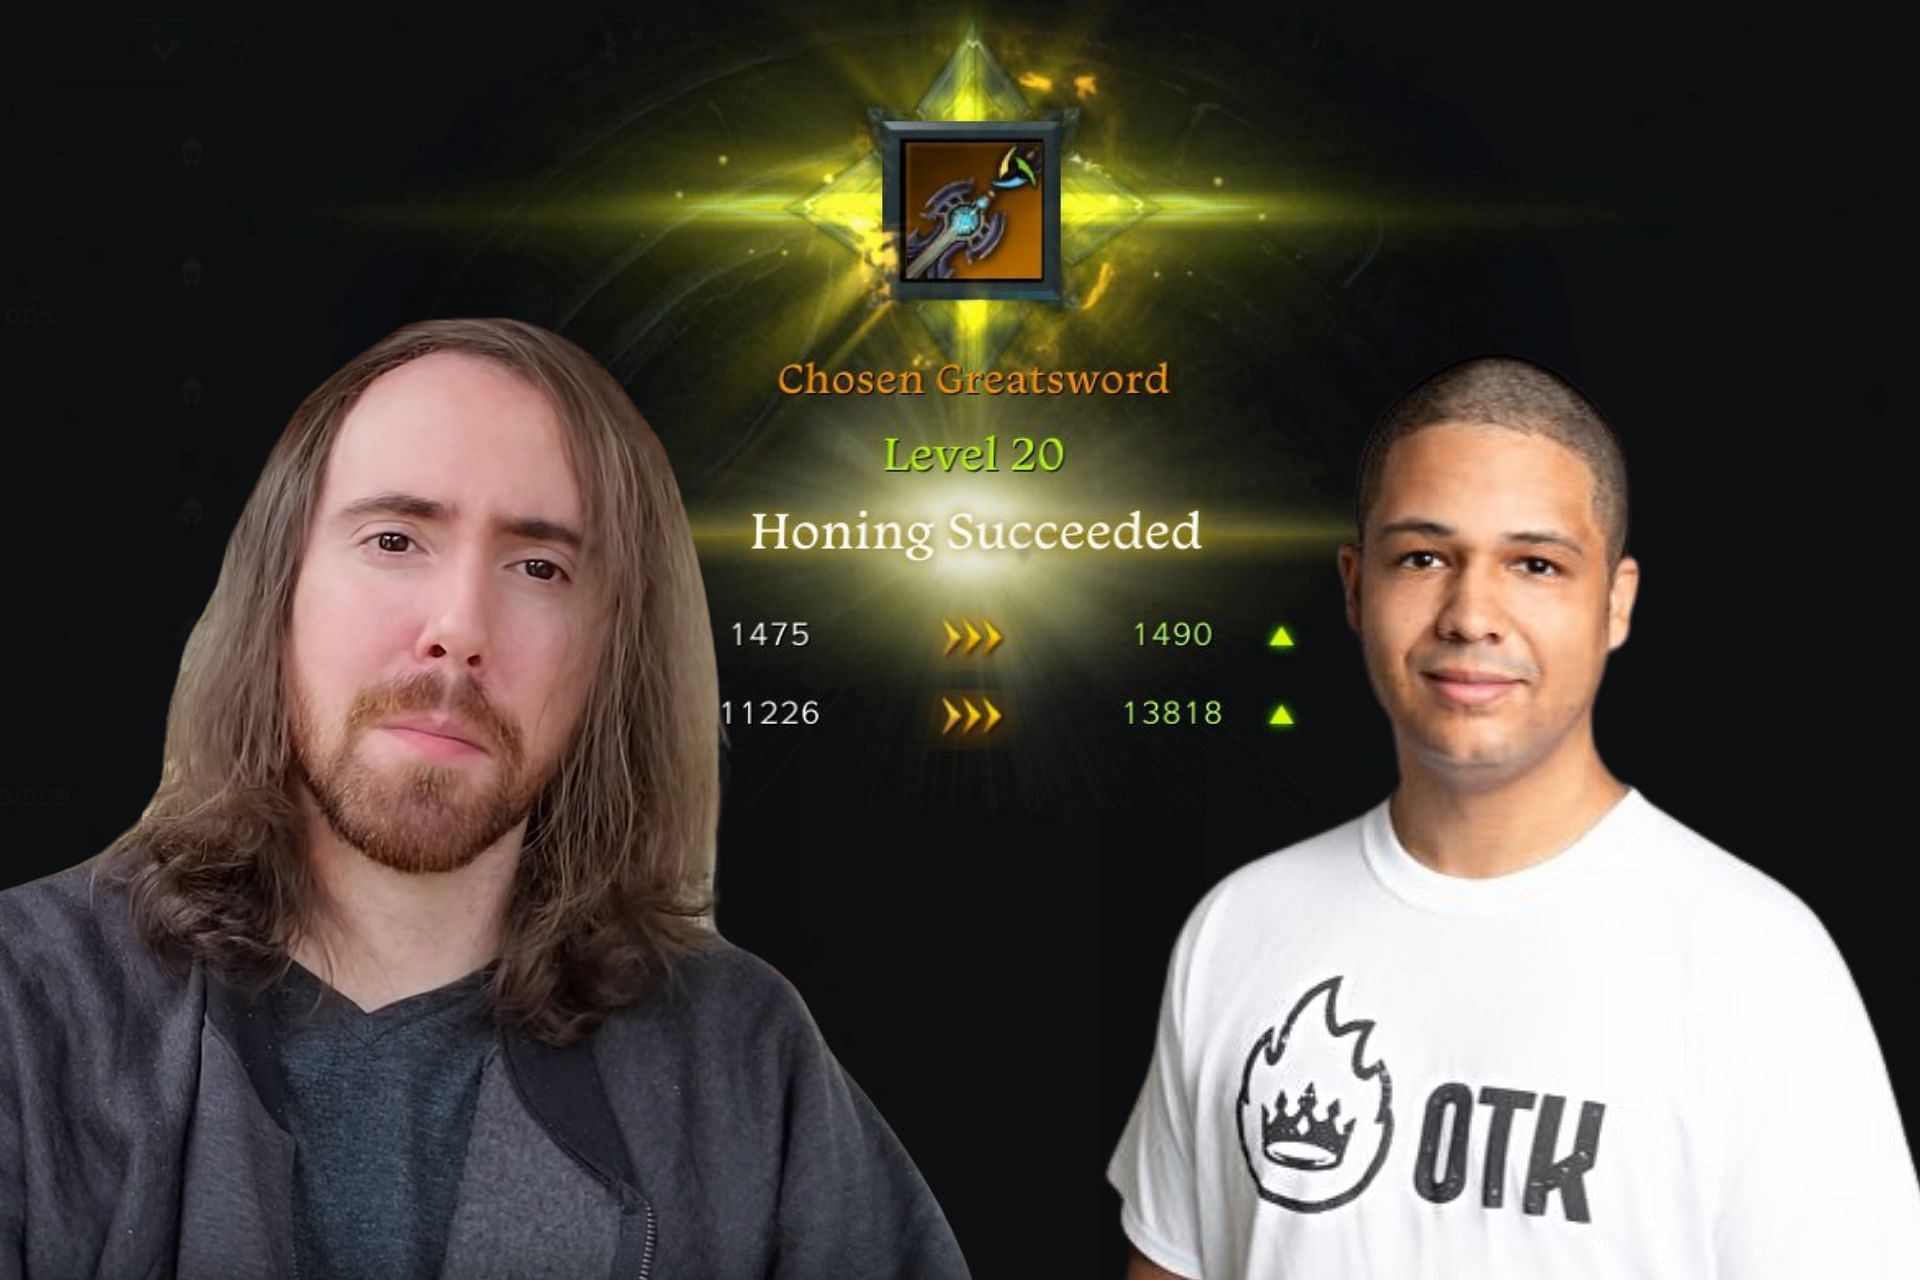 Twitch streamer Nmplol and Asmongold made a gross bet, and sadly, Nmplol lost (Image via Sportskeeda)